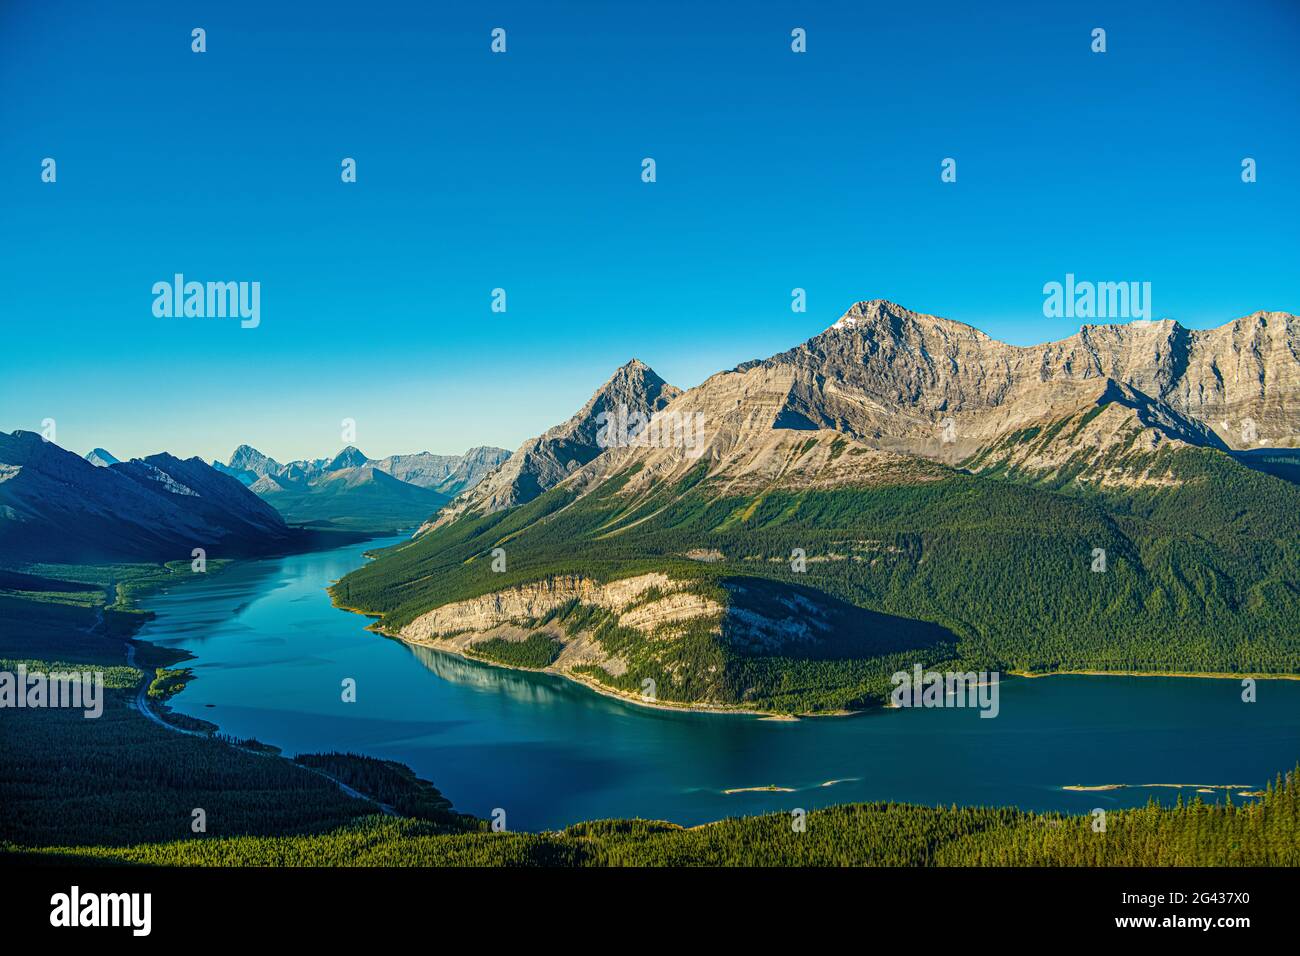 Aerial view of Spray Lakes Reservoir and Canadian Rockies, Alberta, Canada Stock Photo